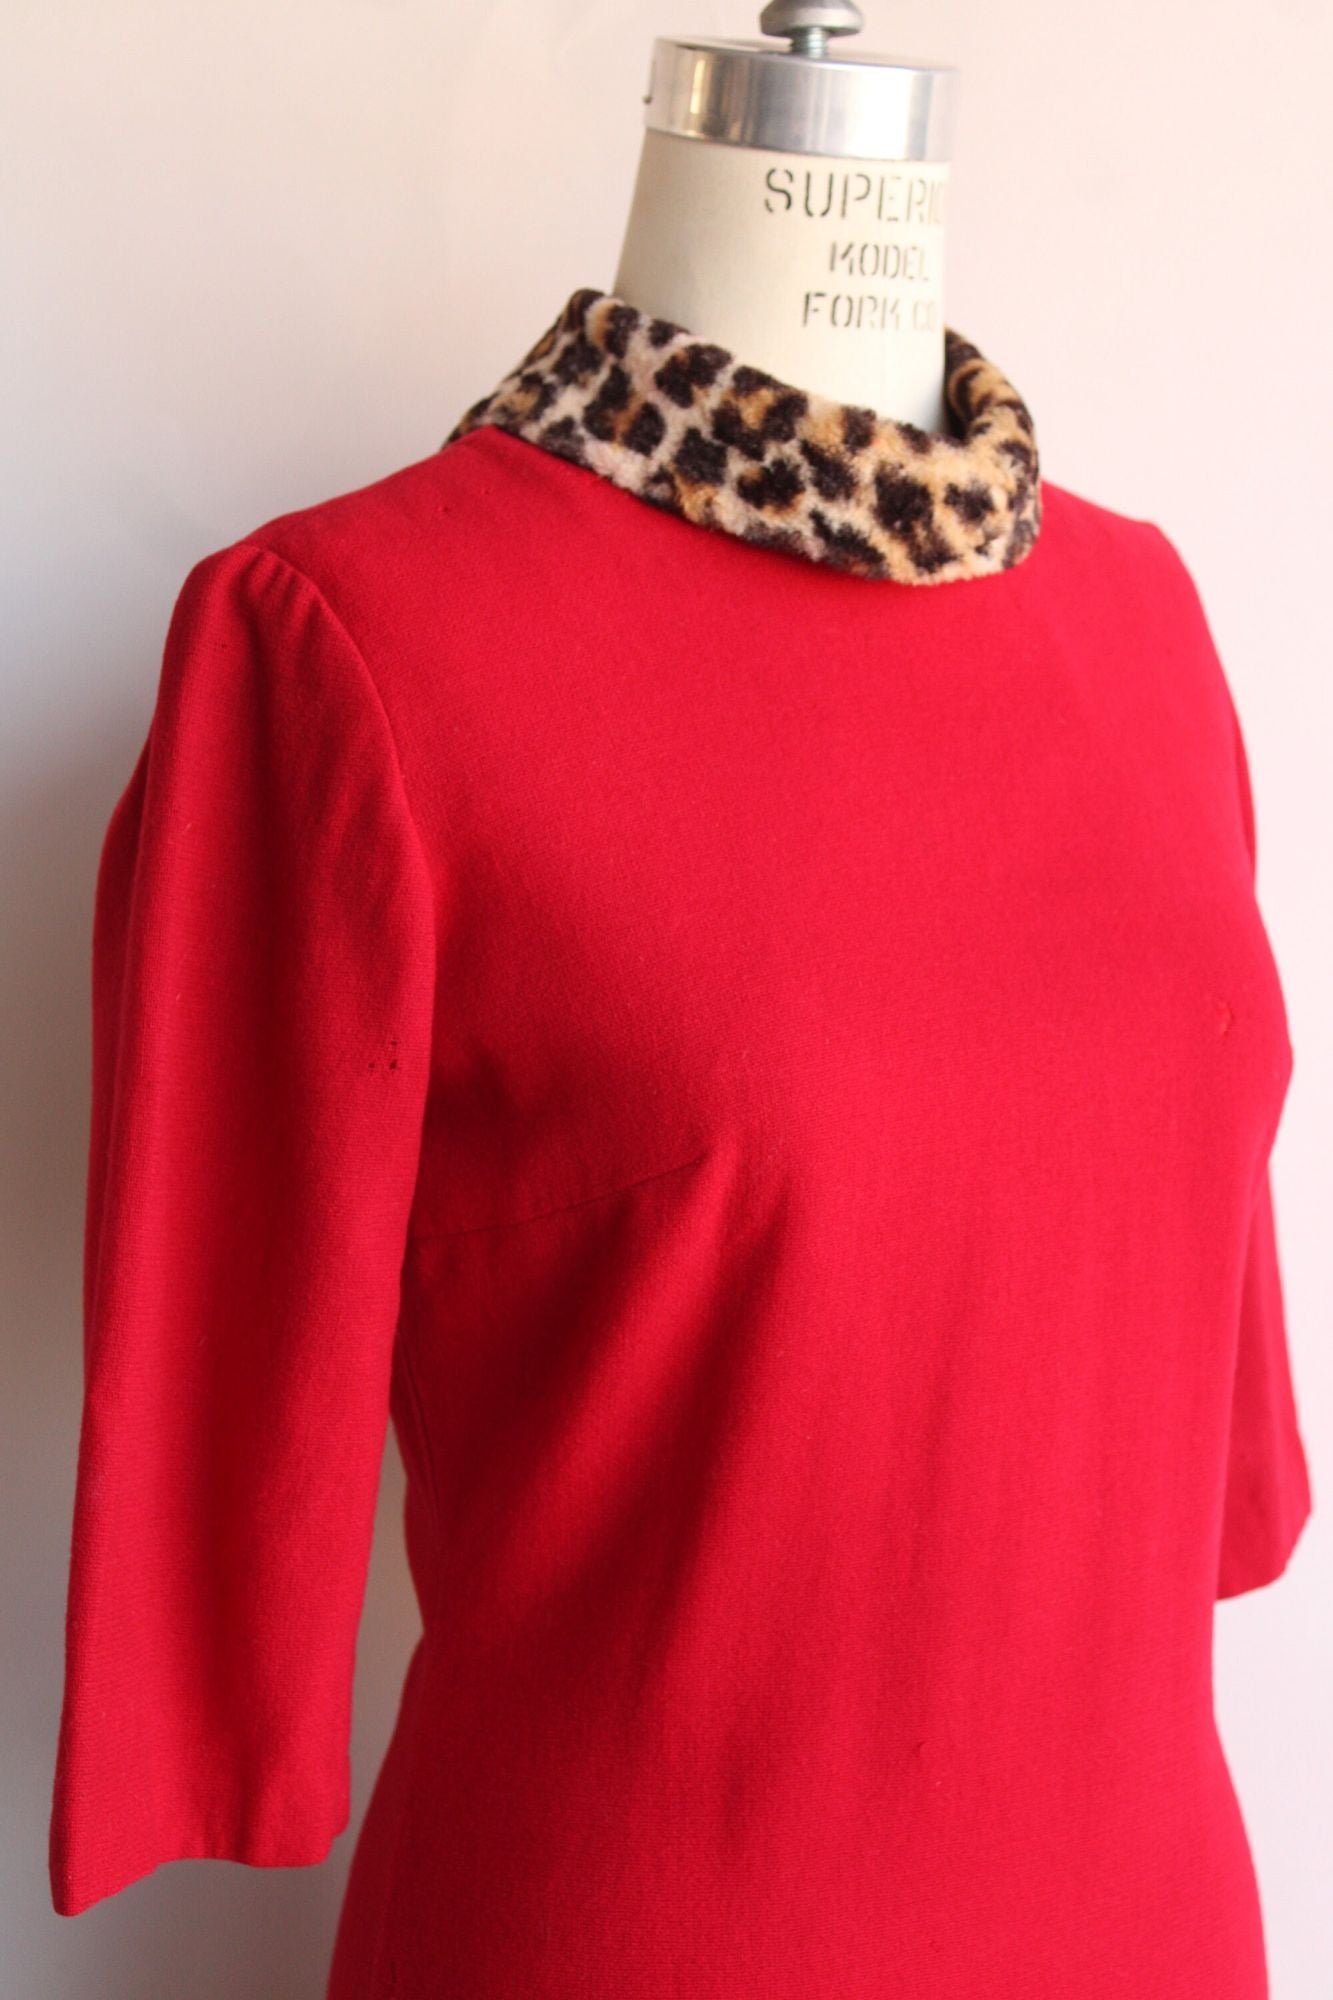 Vintage 1960s Dress in Red Wool with Leopard Print Collar